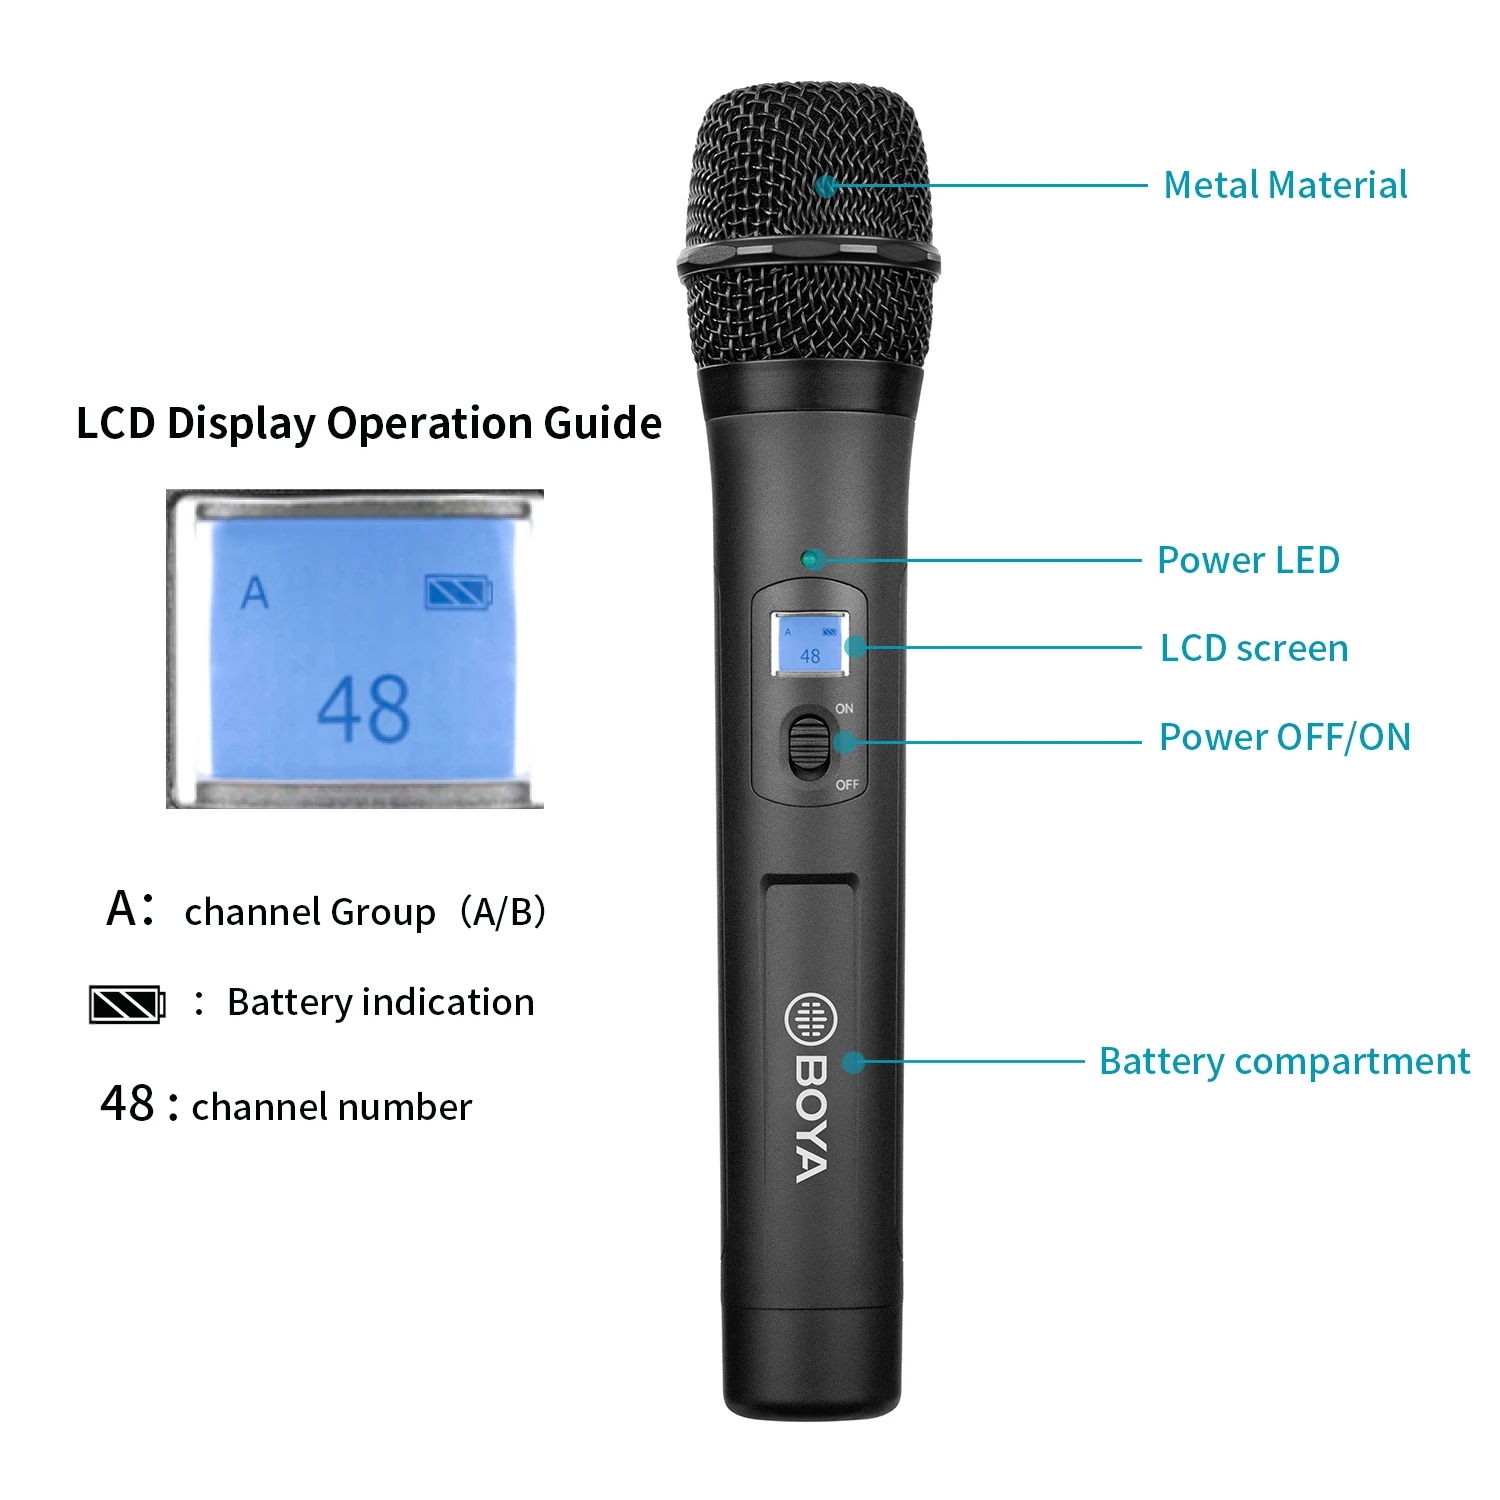 BOYA BY-WM8 PRO K3 UHF Dual-Channel Condenser Wireless Microphone for PC Mobile Smartphone Camera Interview Streaming Youtube images - 6